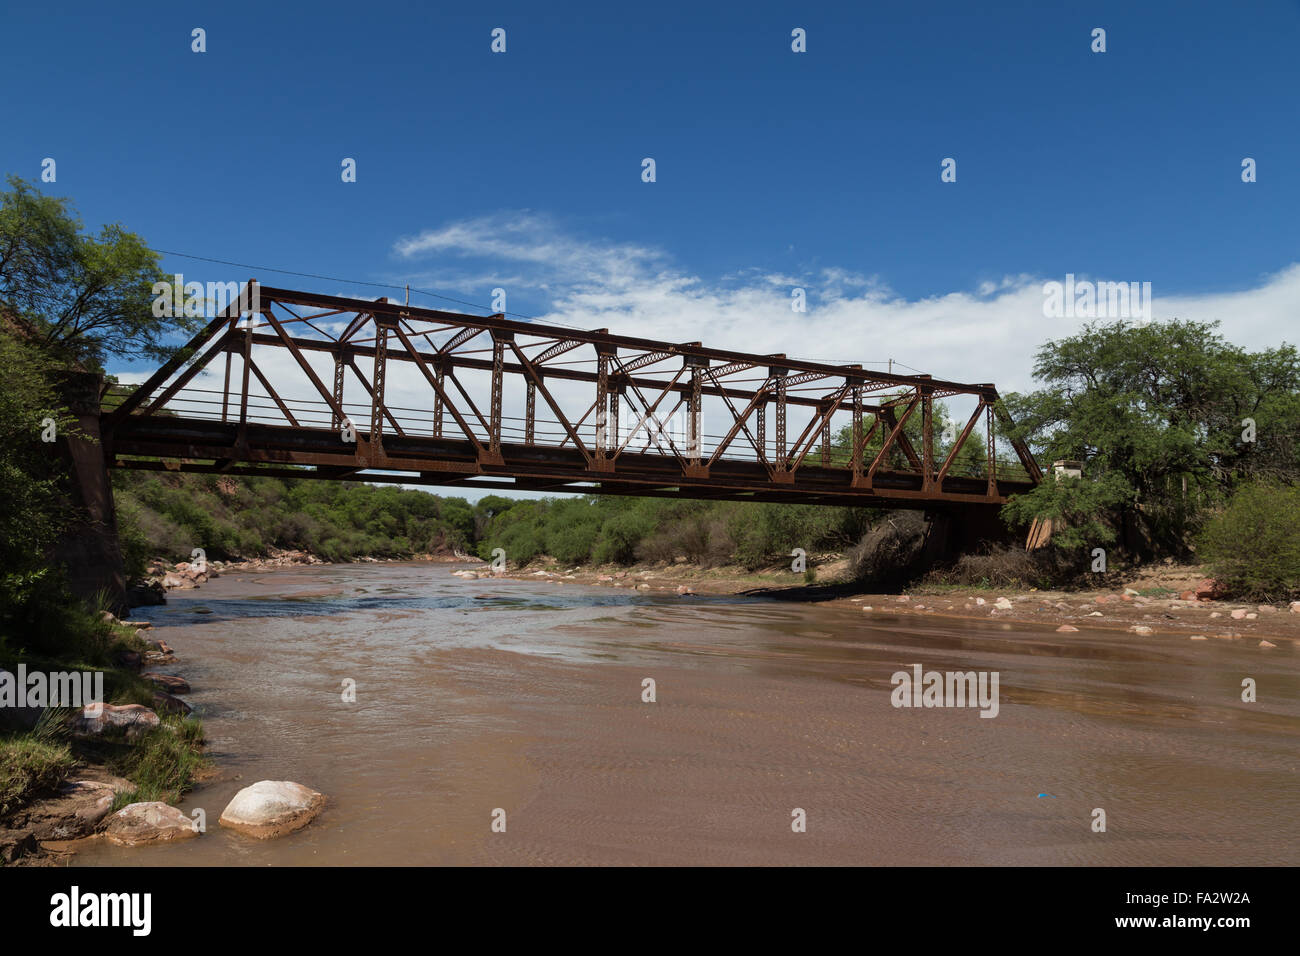 Photograph of a steel bridge construction over a river in the small village Alemania, Argentina. Stock Photo